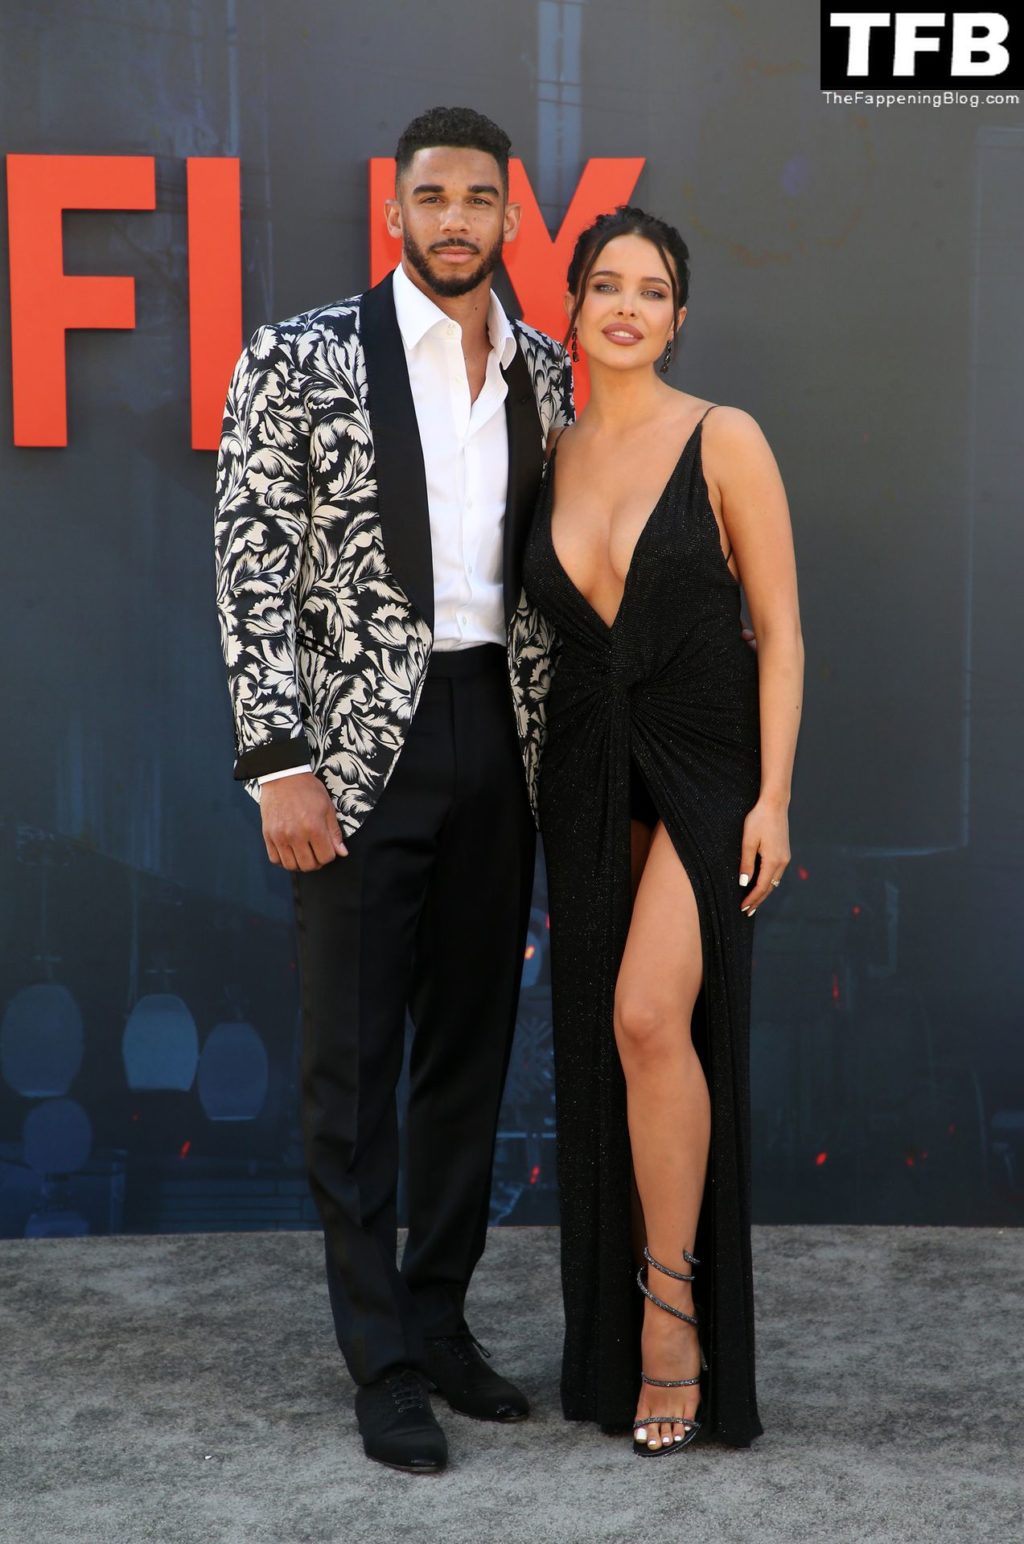 Mara Teigen Flaunts Her Cleavage at the Premiere of Netflix’s “The Gray Man” in Hollywood (Photos)